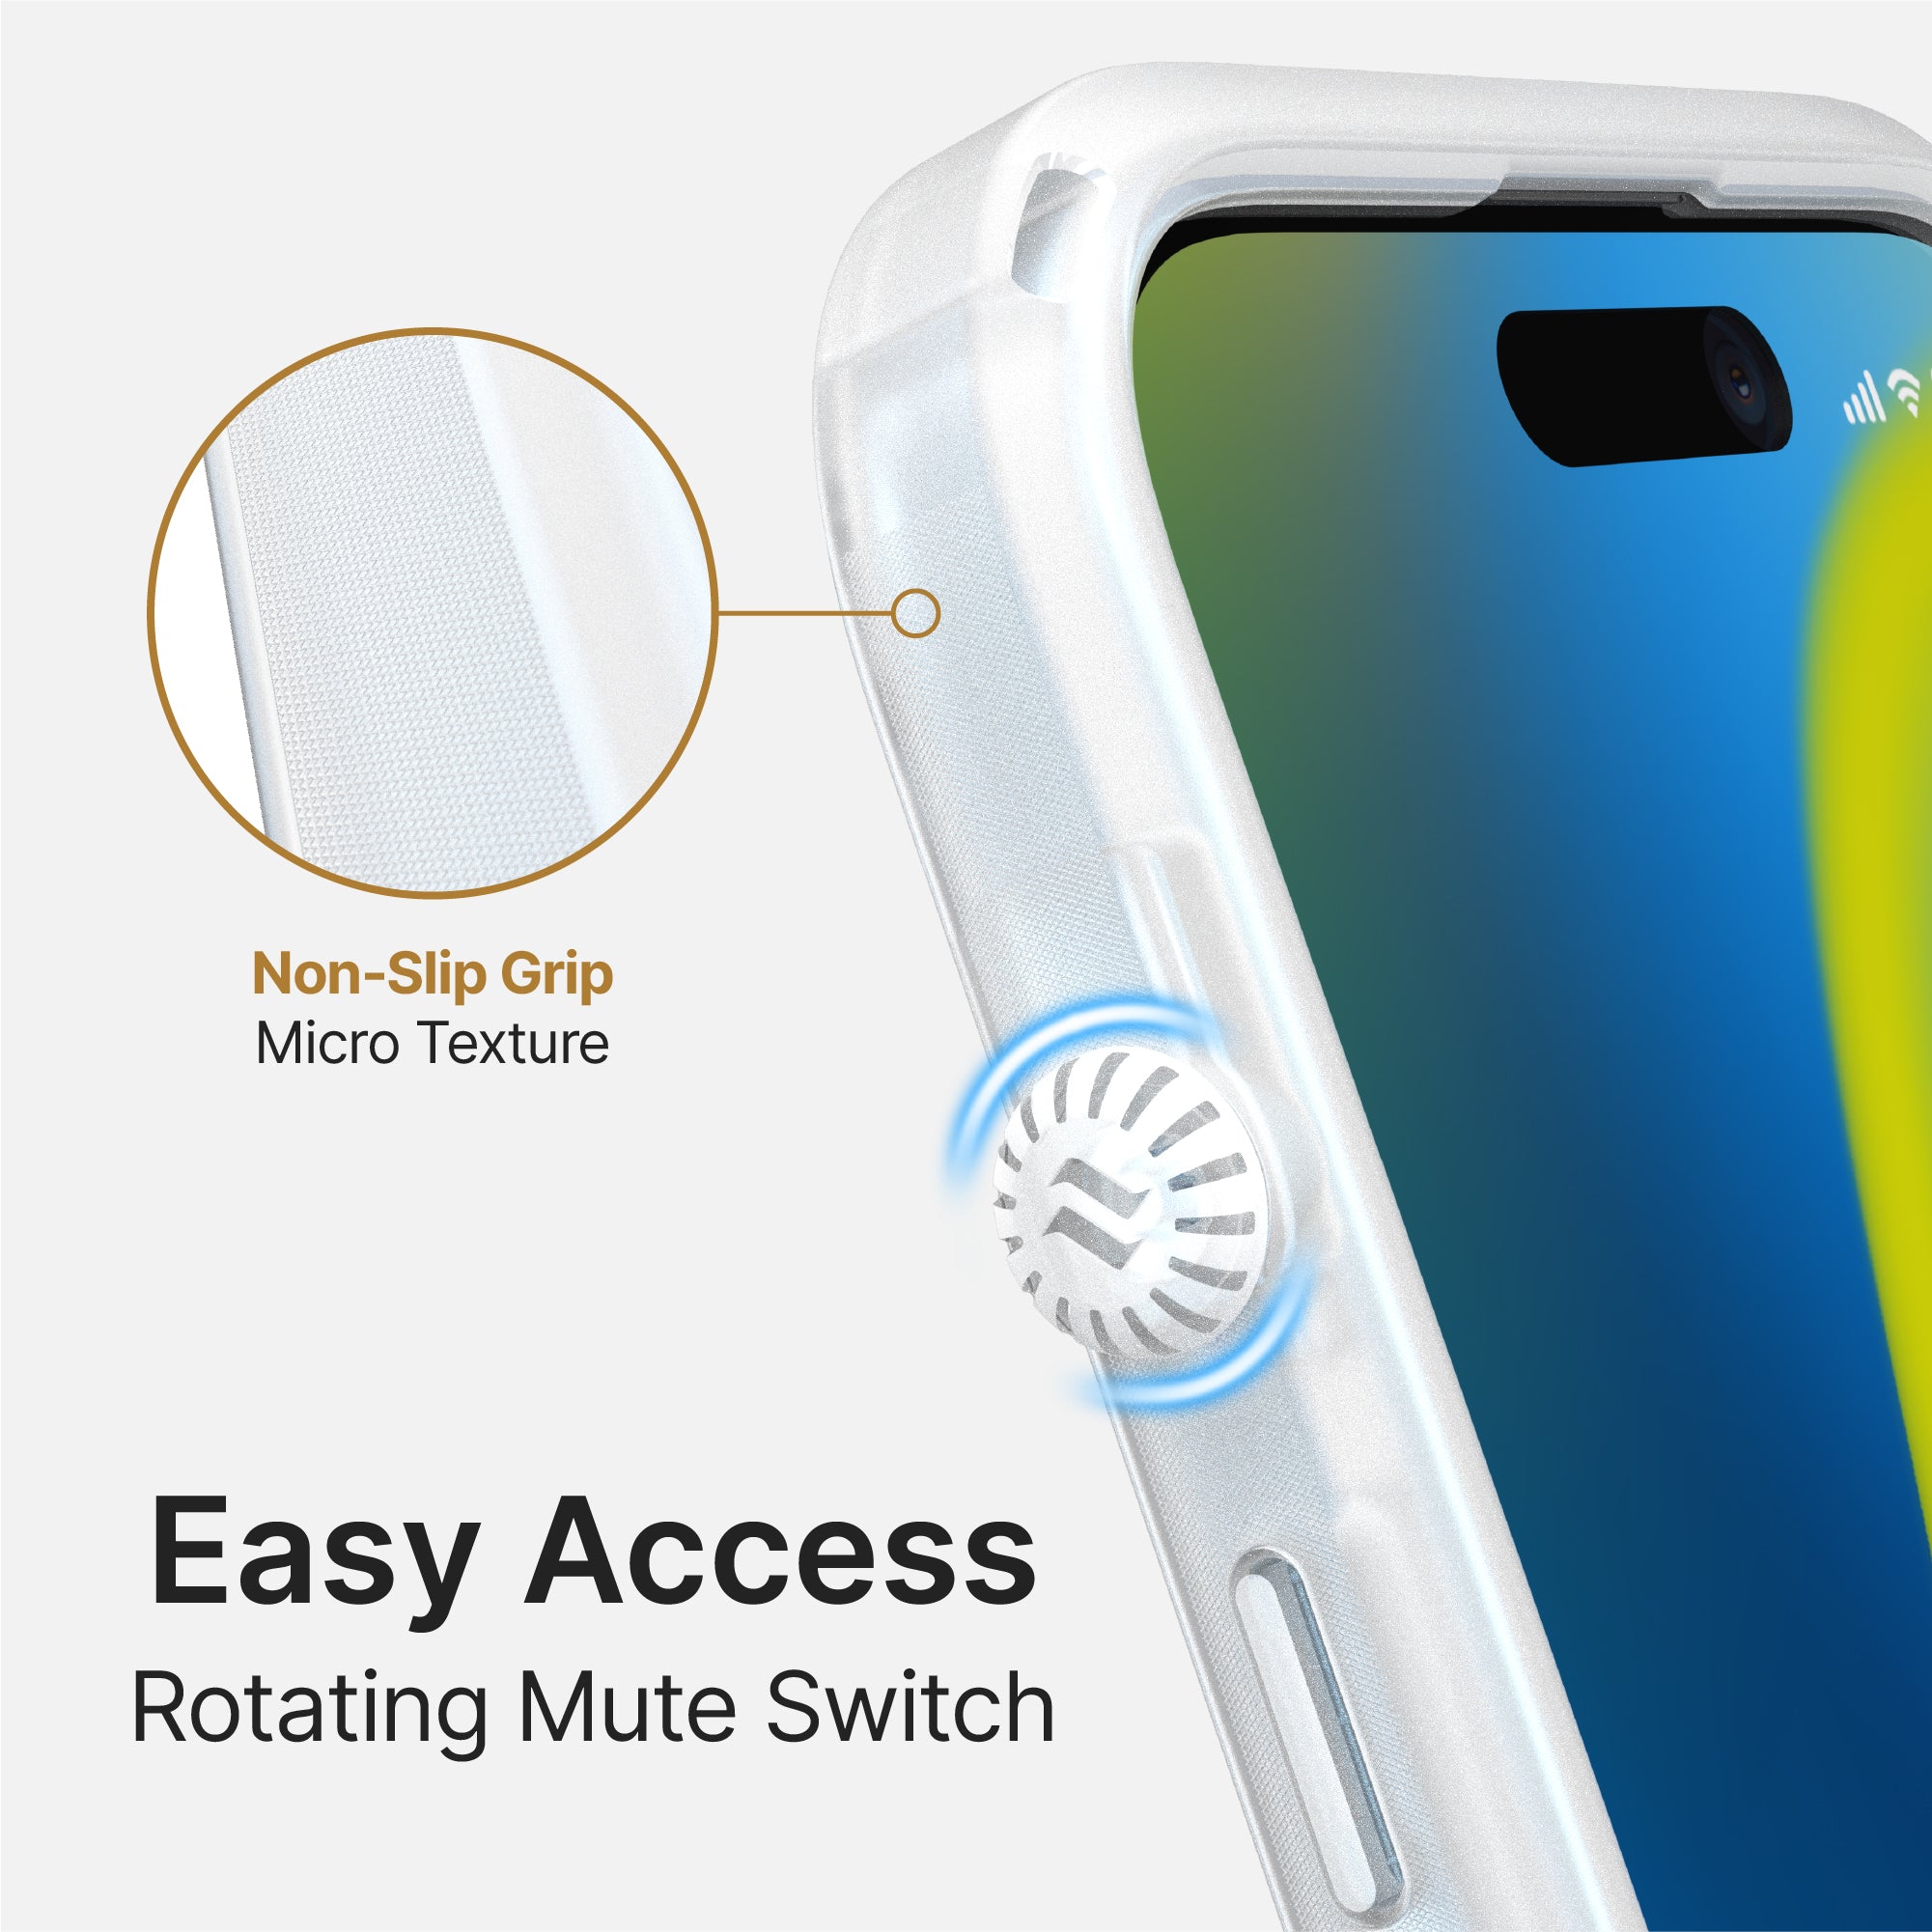 catalyst iphone 15 series influence case magsafe compatible clear for iphone 15 showing the micro texture and rotating mute switch text reads non slip grip micro texture easy access rotating mute switch